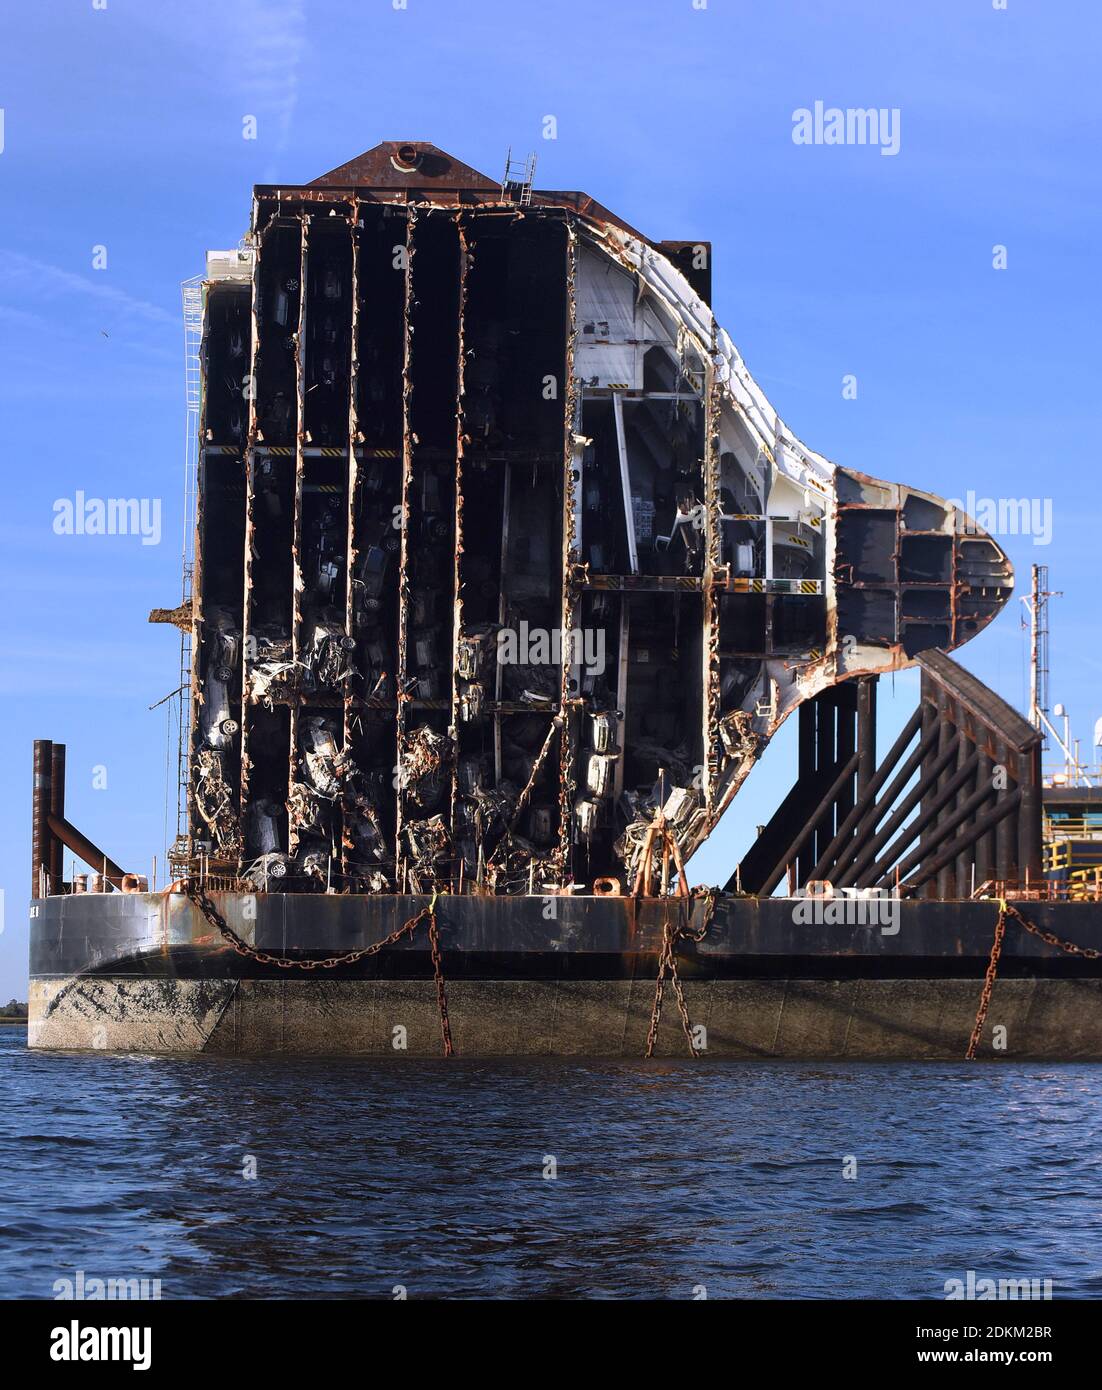 Georgia, USA. 14th Dec, 2020. December 14, 2020 - Brunswick, Georgia, United States - Cars are seen in the bow section of the Golden Ray cargo ship as it sits on a barge on December 14, 2020 in Brunswick, Georgia. A salvage company is cutting the vessel into eight segments, each of which will be removed by a barge and scrapped. The vehicle carrier, loaded with 4200 new cars, capsized in St. Simons Island Sound on September 8, 2019 as it was leaving the Port of Brunswick, Georgia. (Paul Hennessy/Alamy) Credit: Paul Hennessy/Alamy Live News Stock Photo